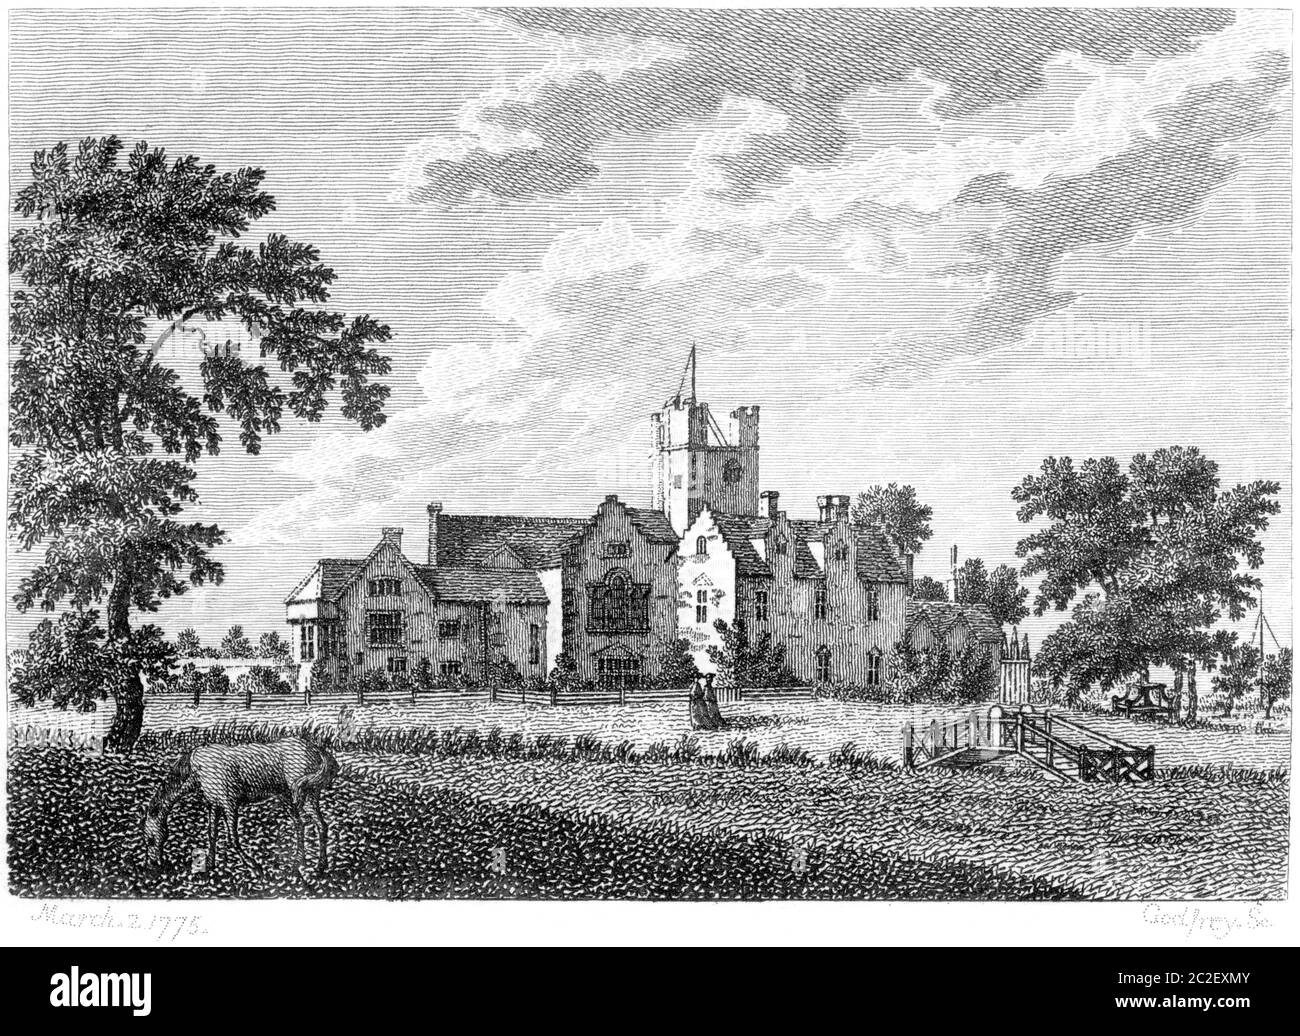 An engraving of Bustlesham or Bysham Monastery (Bisham Abbey) March 2 1775 scanned at high resolution from a book published in the 1770s. Stock Photo